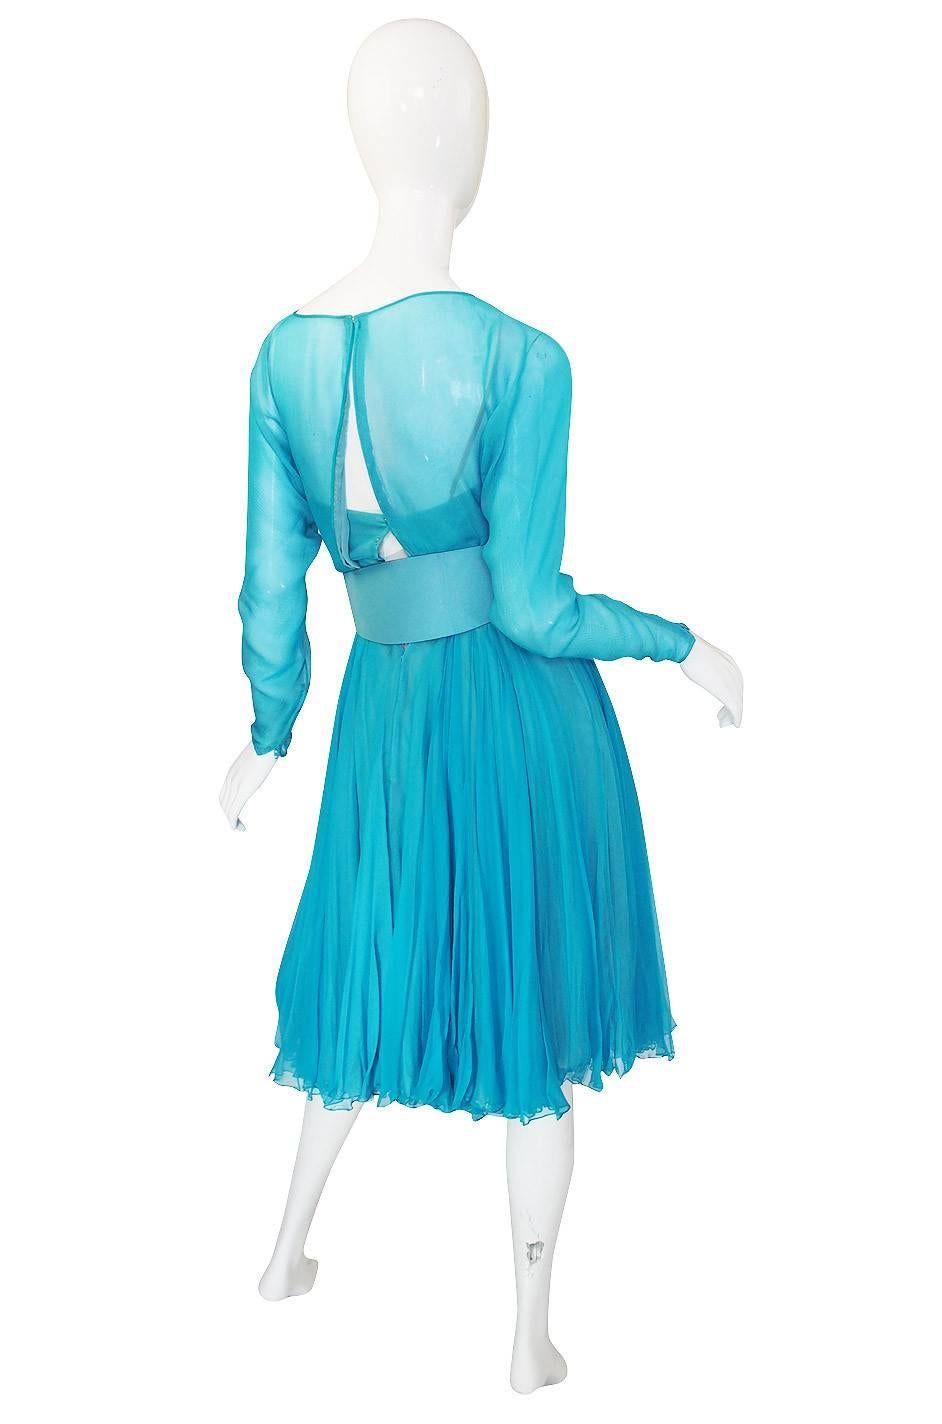 The construction on this 1960s Galanos dress is divine. It is made of layers of gossamer weight silk chiffon - a difficult fabric to work with under any circumstance. Galanos cut it on the bias, layered it and made it all work perfectly. Three